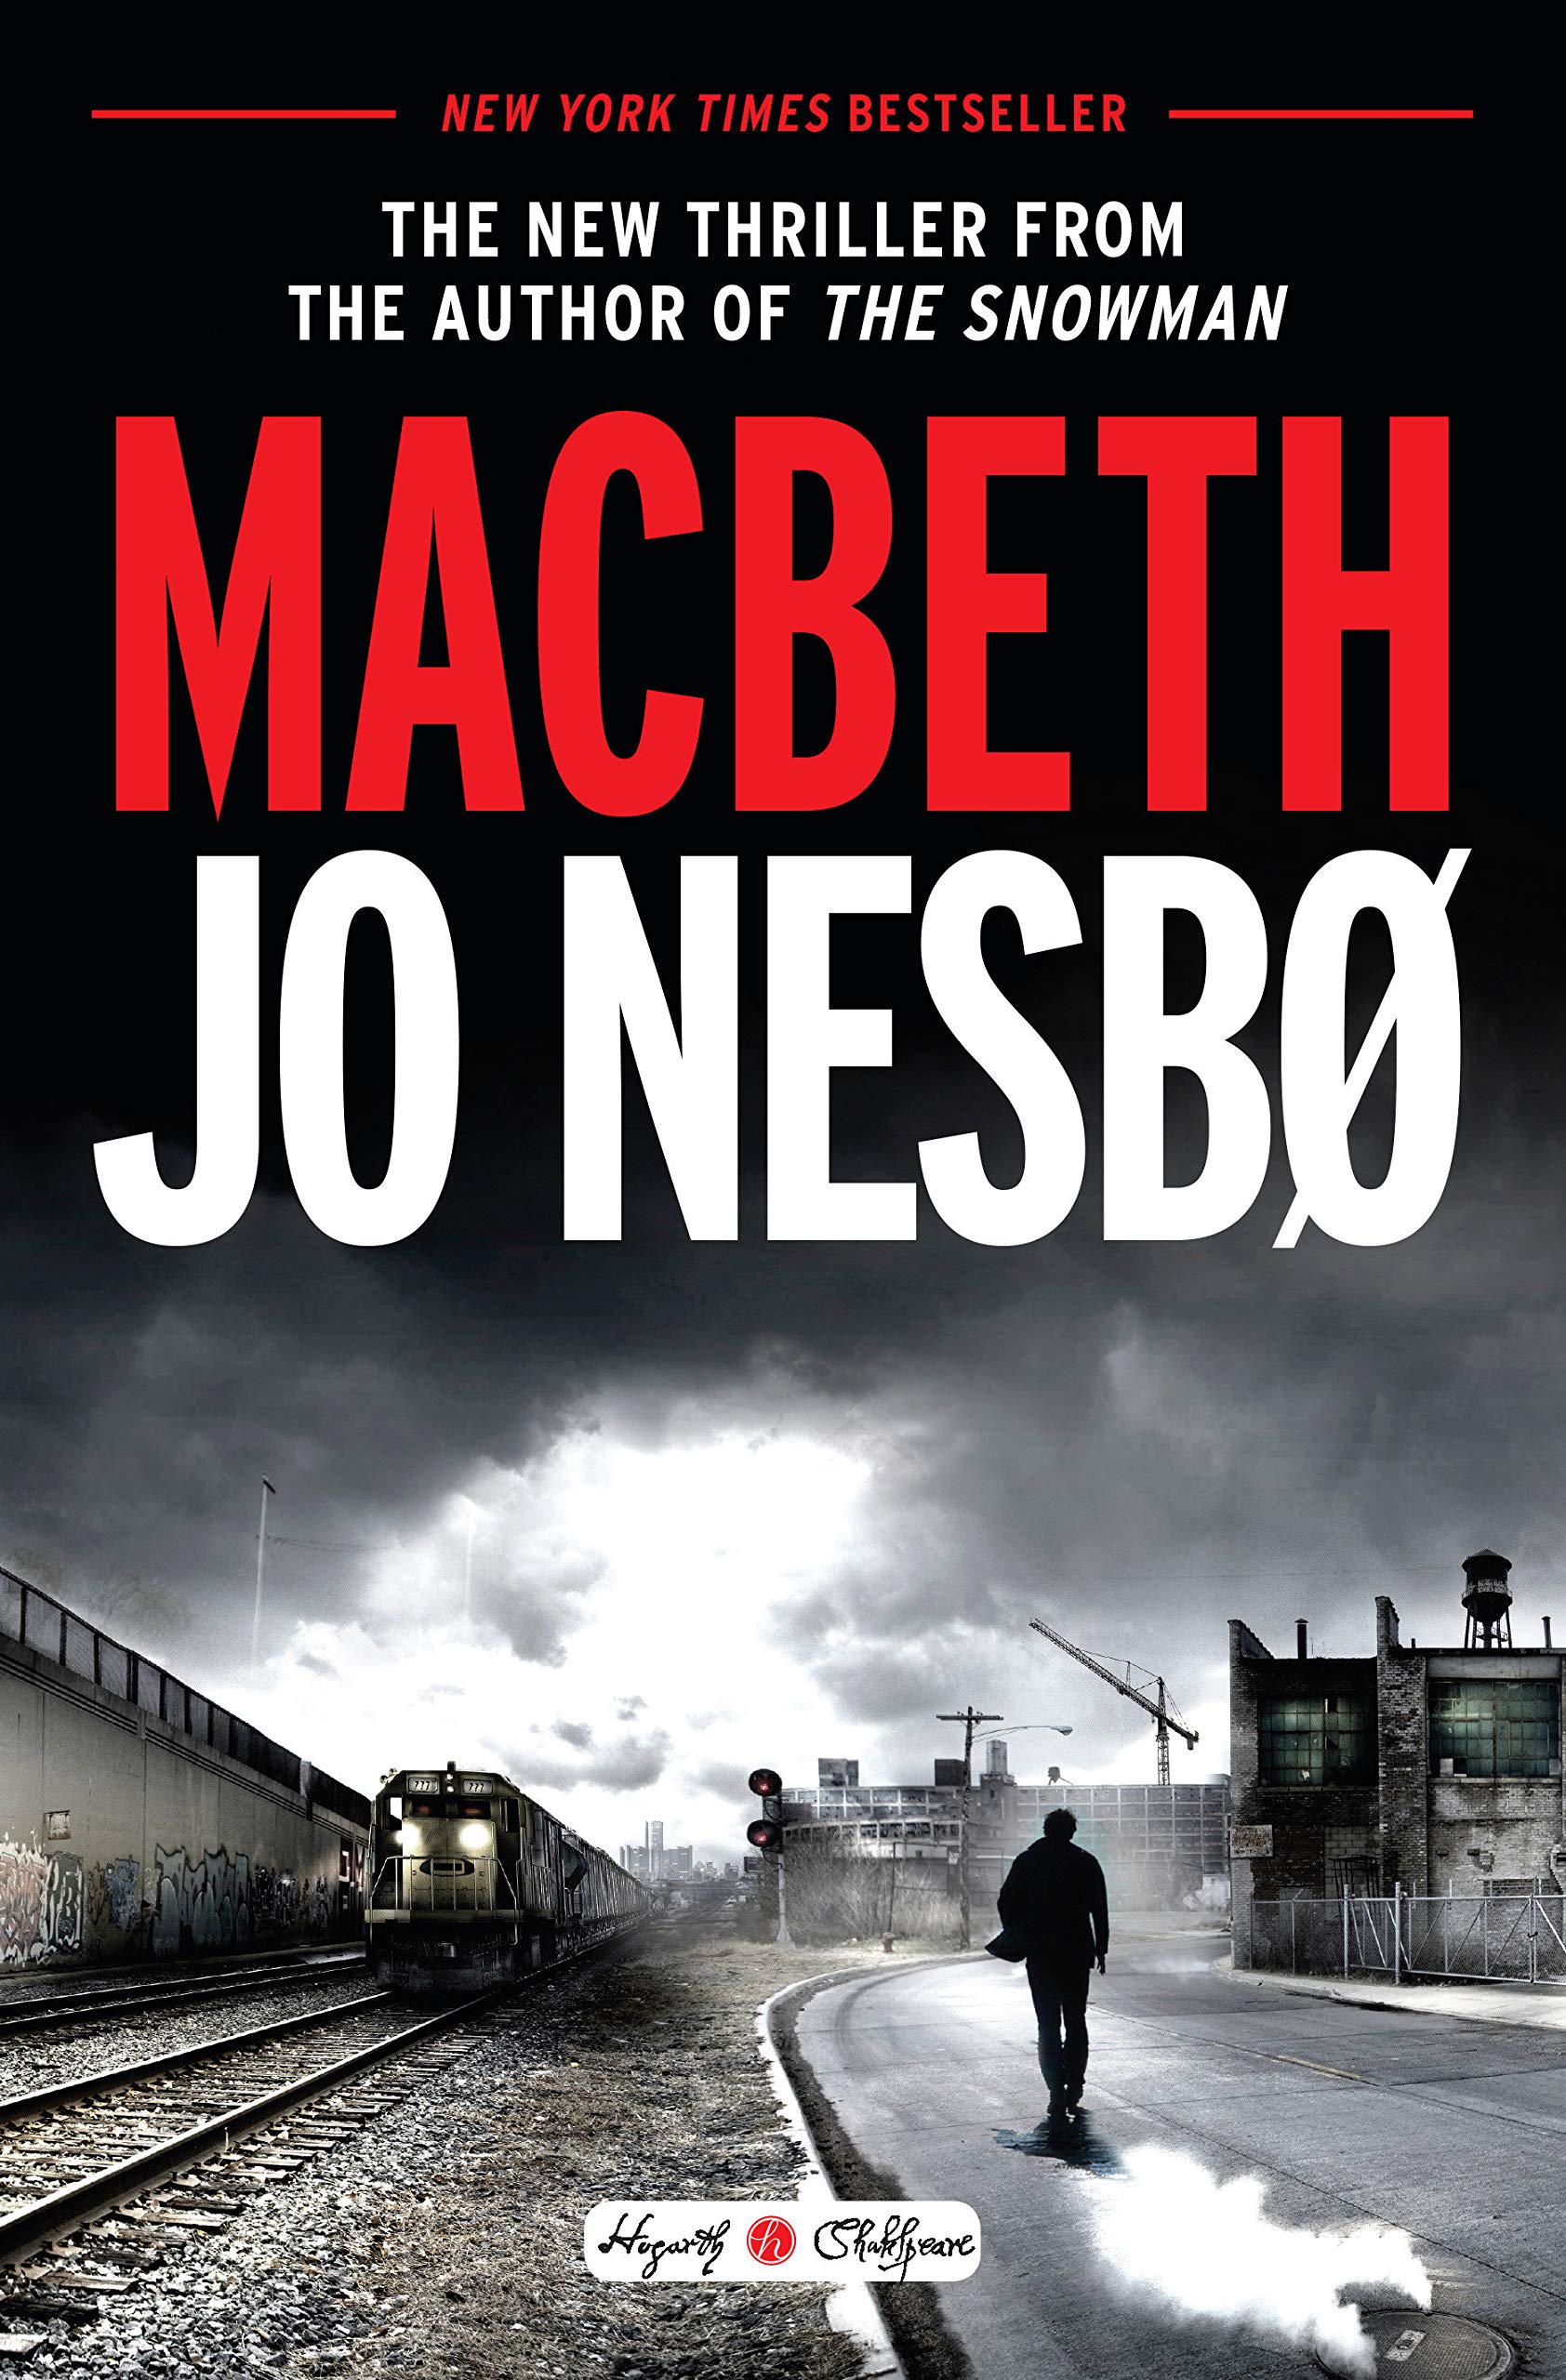 A gritty book cover featuring a solitary figure standing on train tracks with an oncoming train in the background, under ominous, cloudy skies, promoting "macbeth" by jo nesbø, hailed as a new thriller from the author of "the snowman.